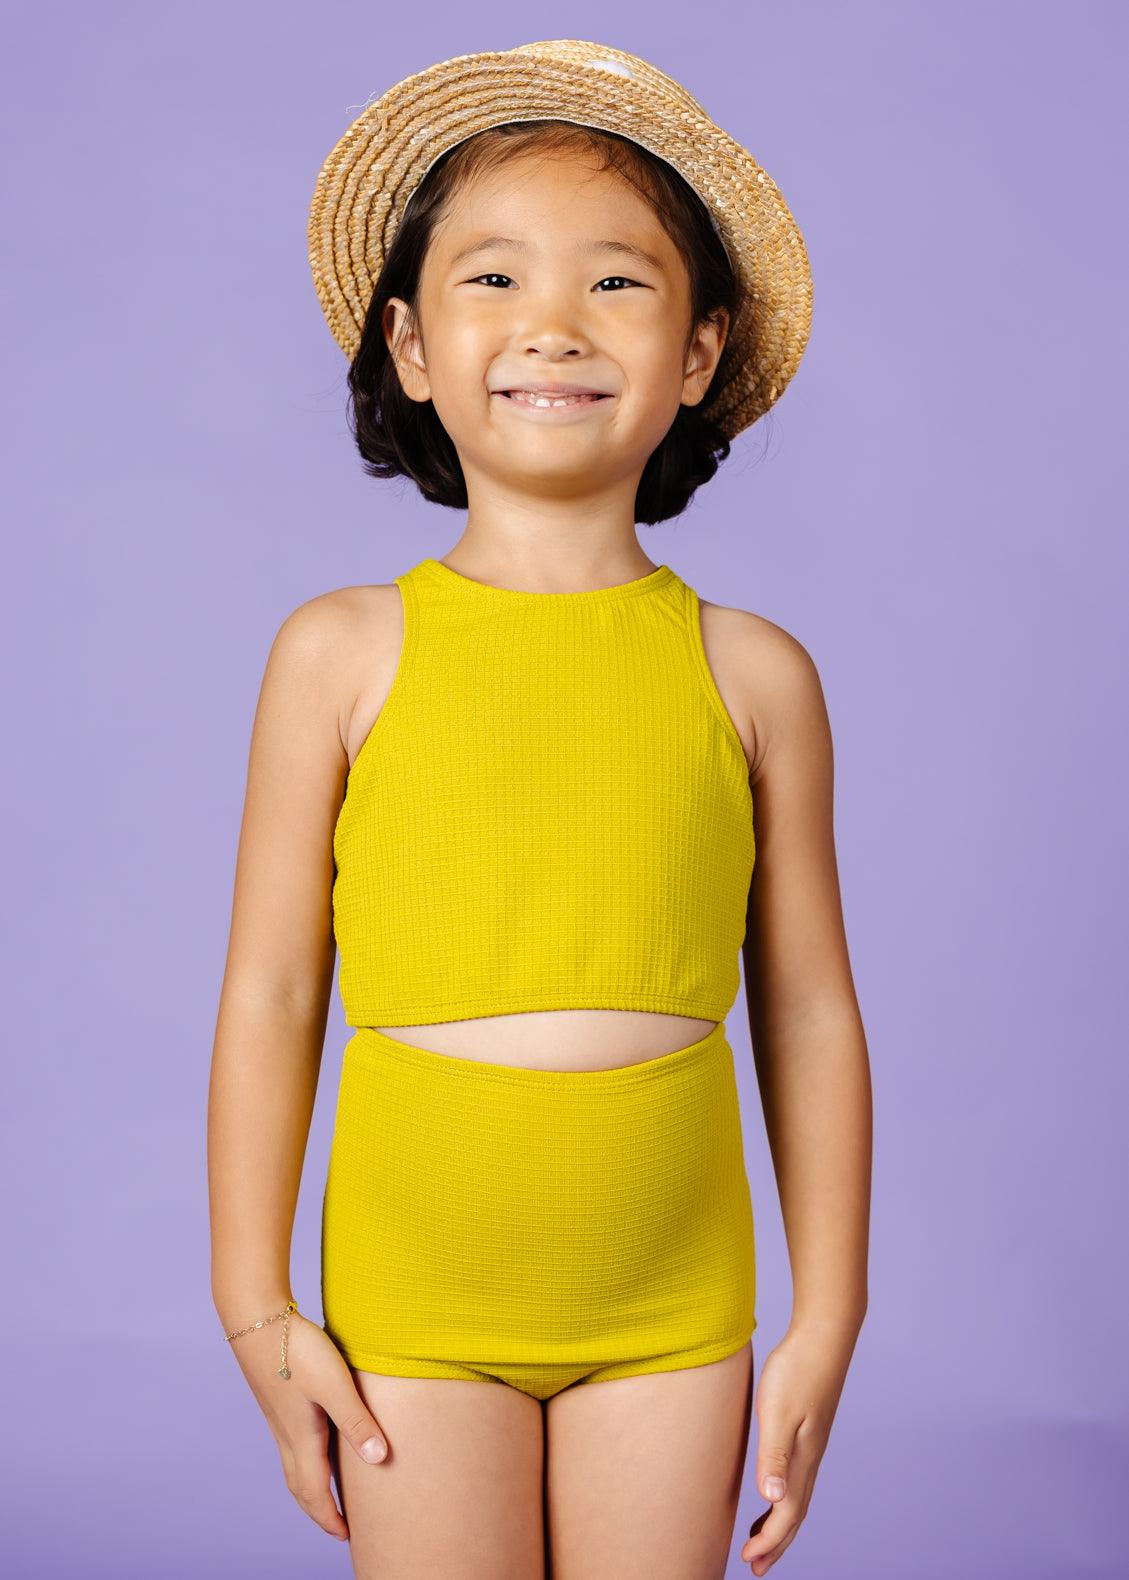 Girls Crop Top Swimsuit - Waffled Pear